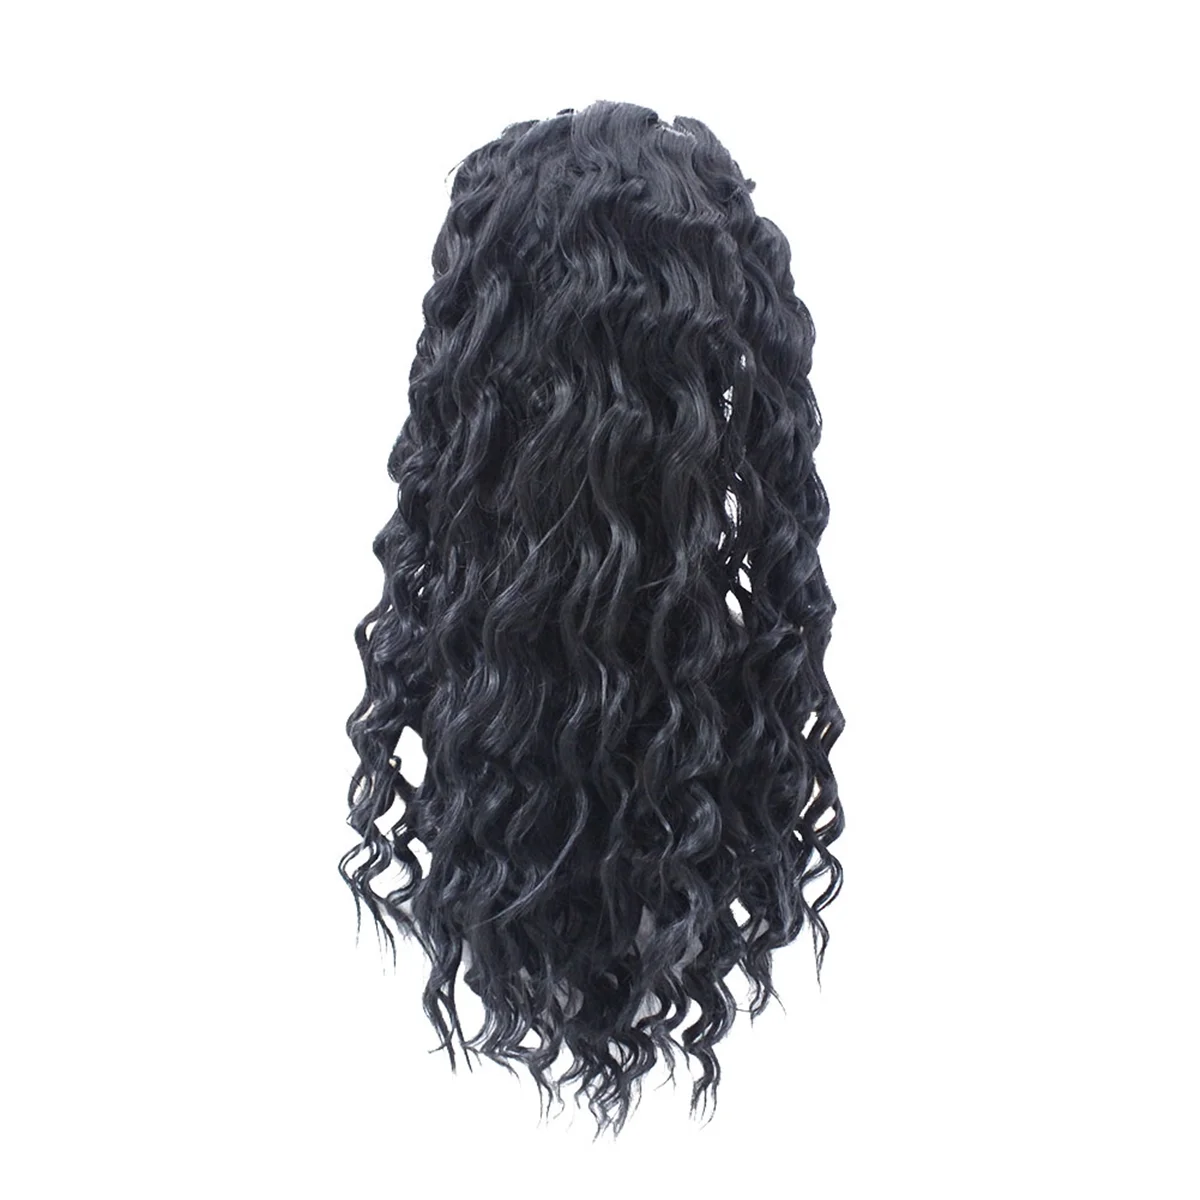 

20 Inches Front Lace Curly Fringe Wig Curly Hair Wigs Brazilian Remy- Curly Human-Hair Wigs for Women